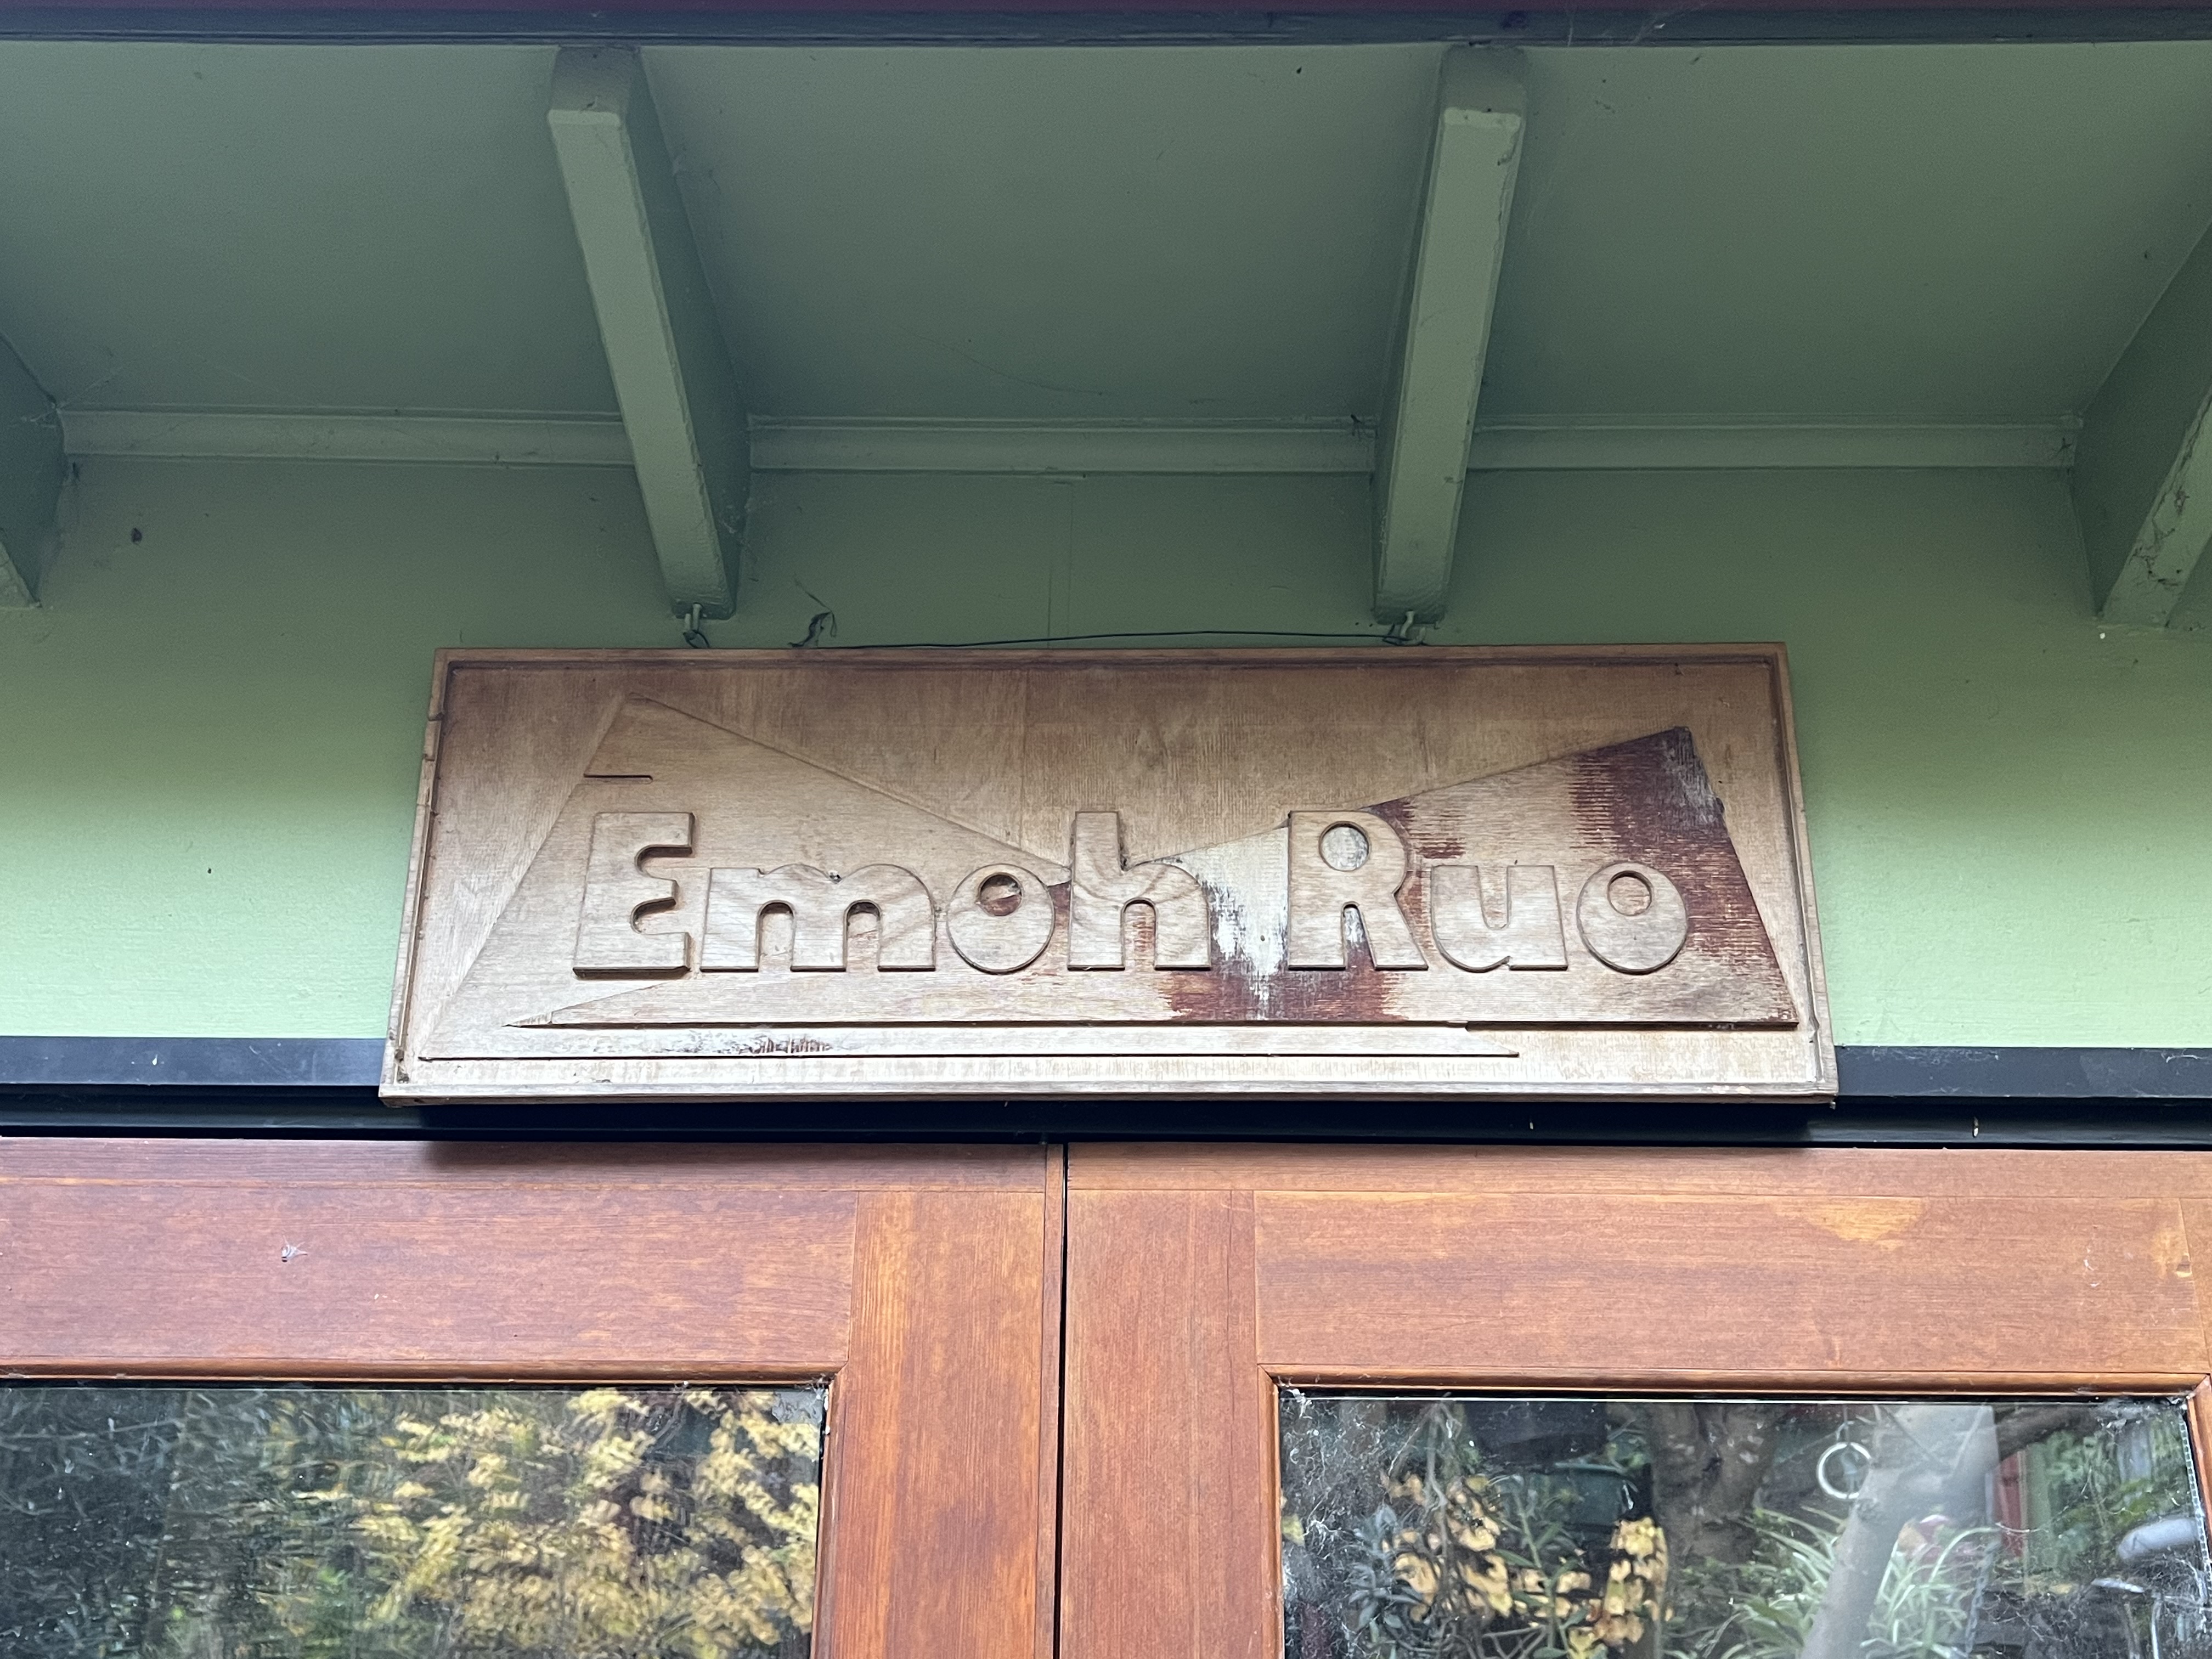 A sign above a door reads "Emoh Ruo"